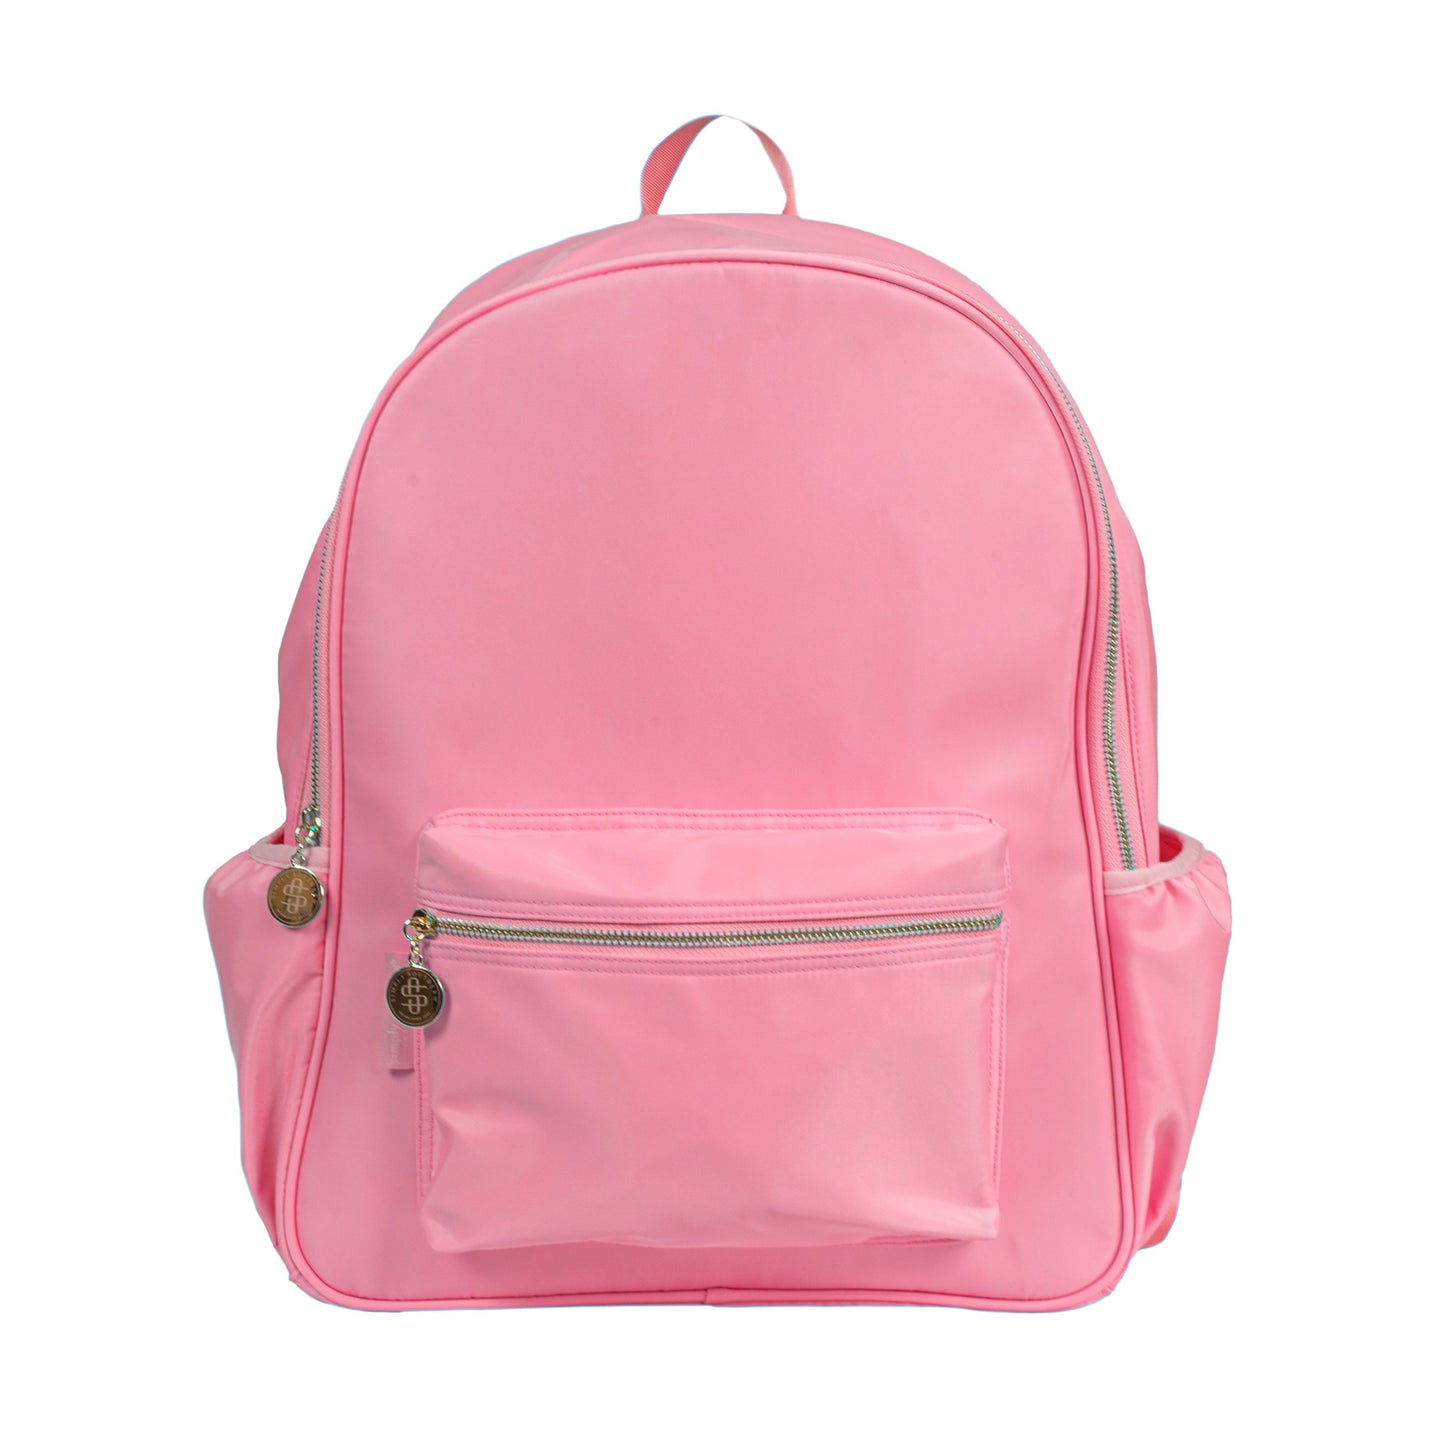 Simply Southern Backpack in 5 Colors